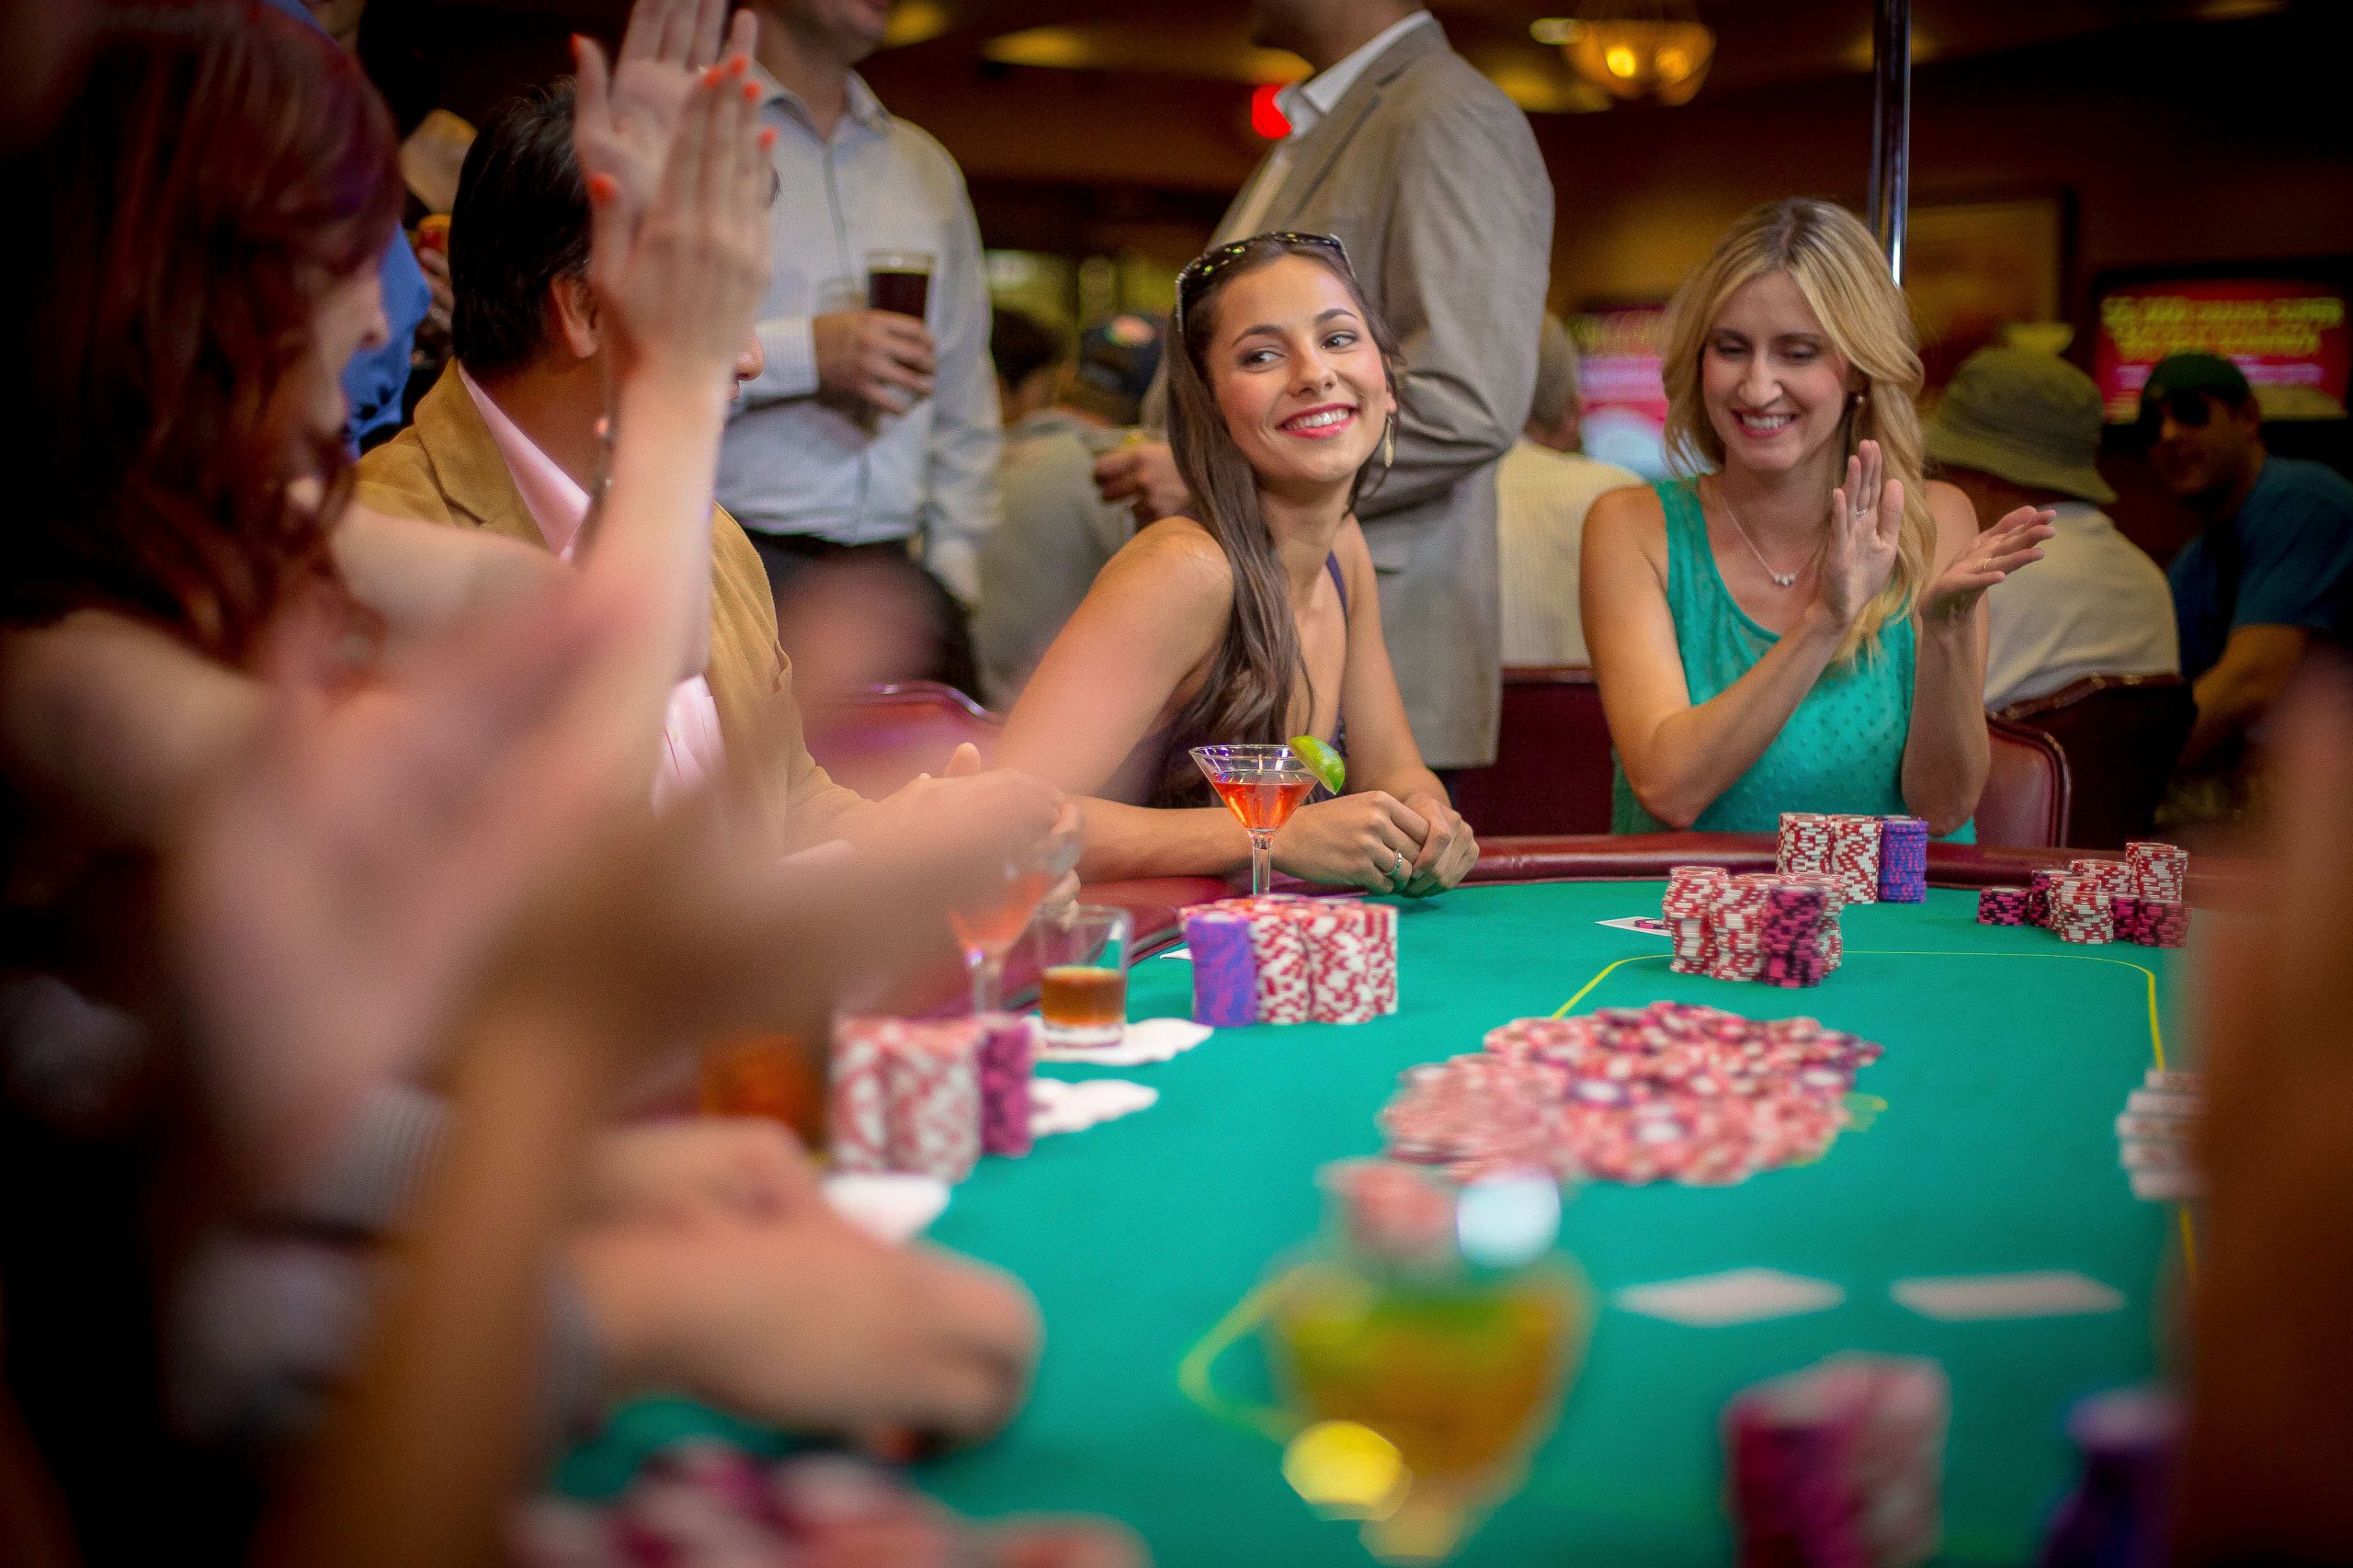 What is the role of psychology in playing video poker?